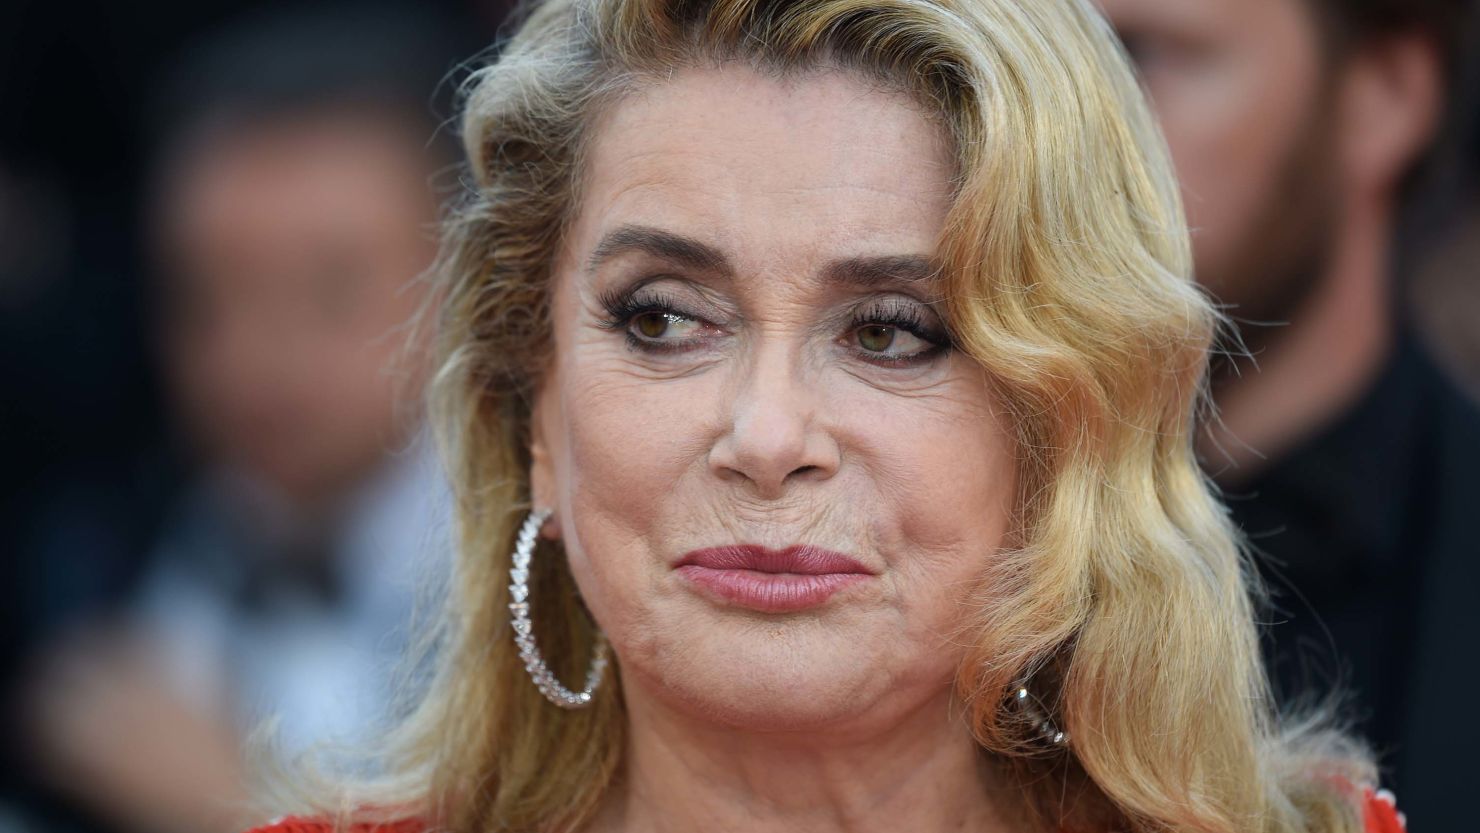 French star Catherine Deneuve was among those who signed a letter criticizing the #MeToo movement.